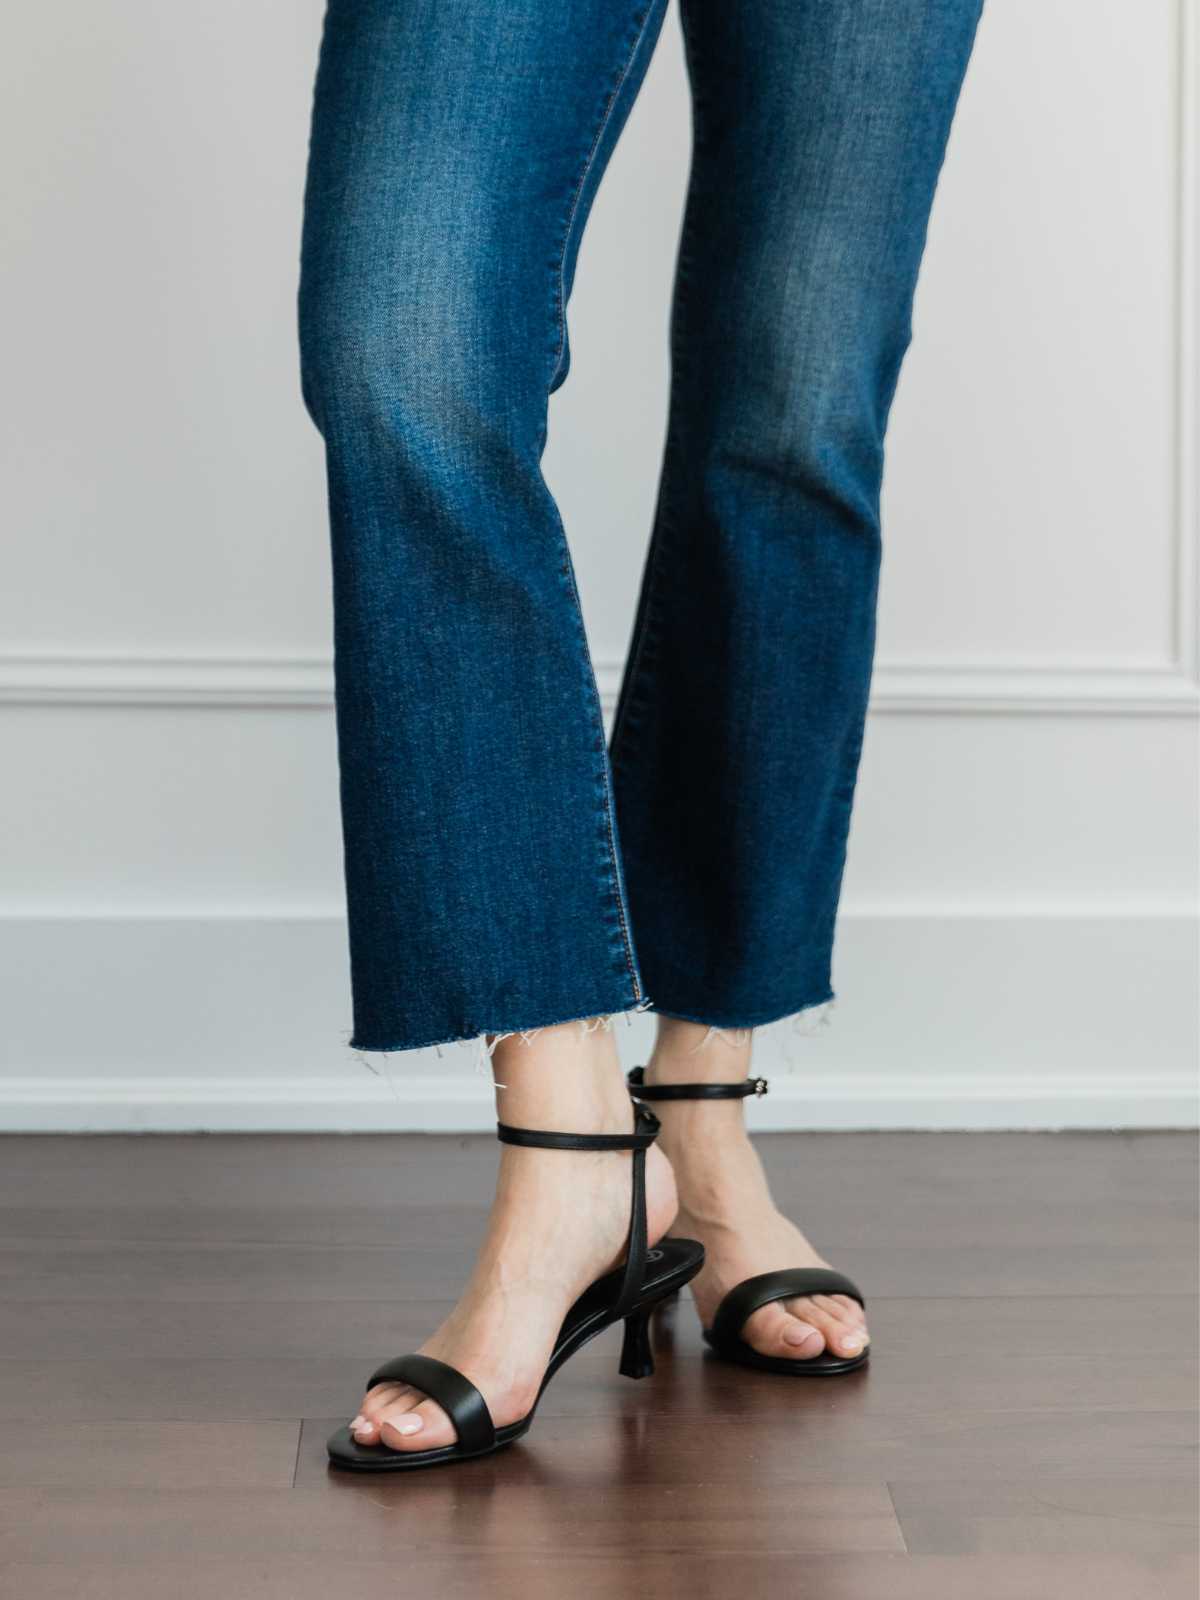 Cropped view of woman's legs wearing kitten heel sandals with kick flares